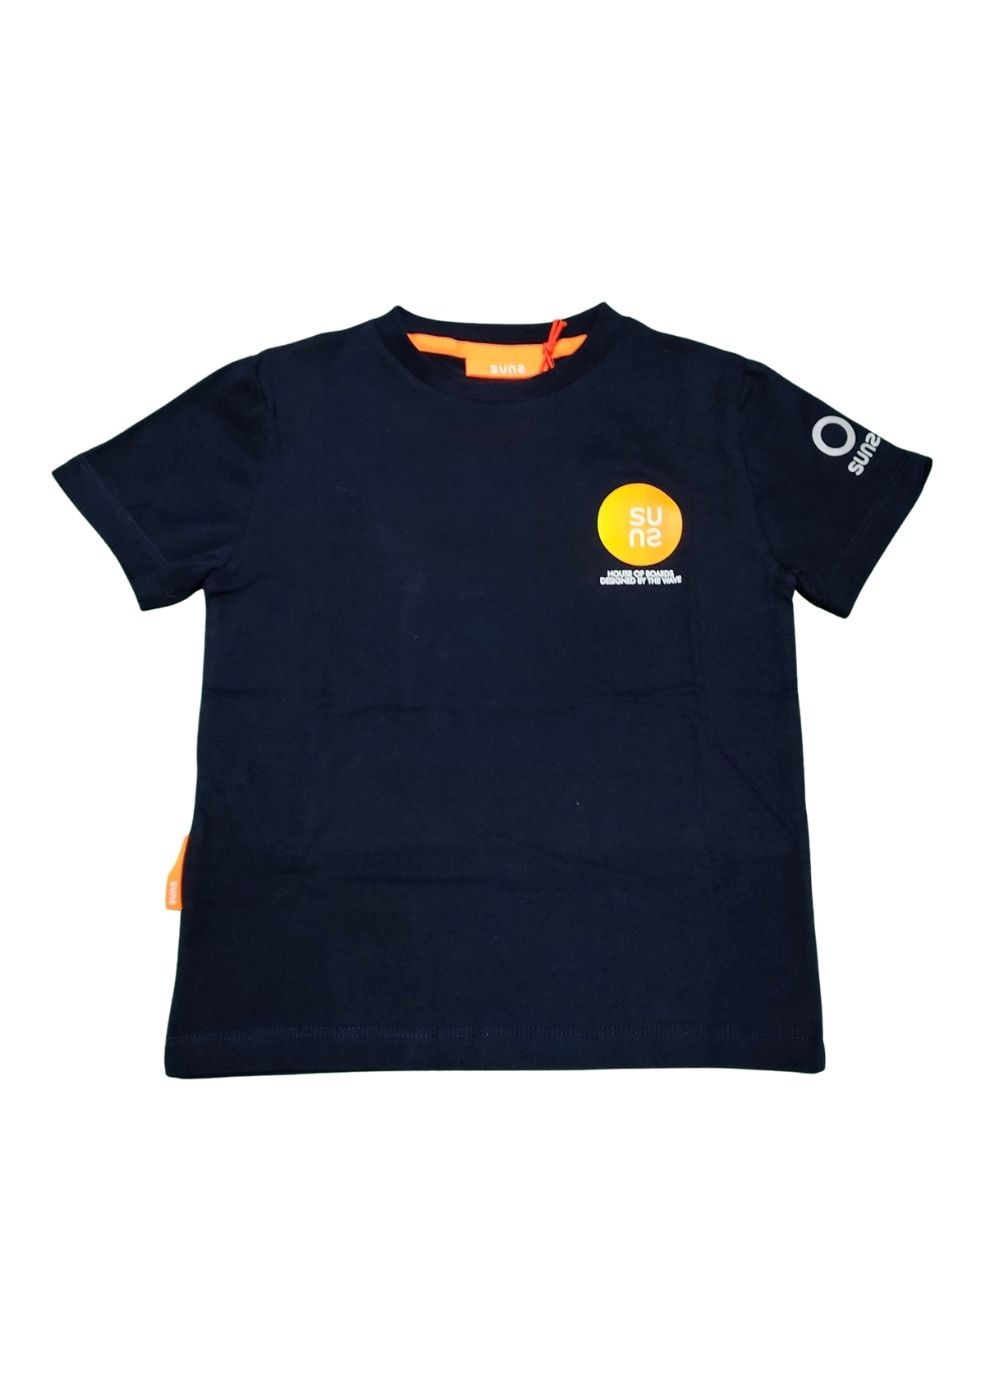 Featured image for “SUNS T-SHIRT LOGO”